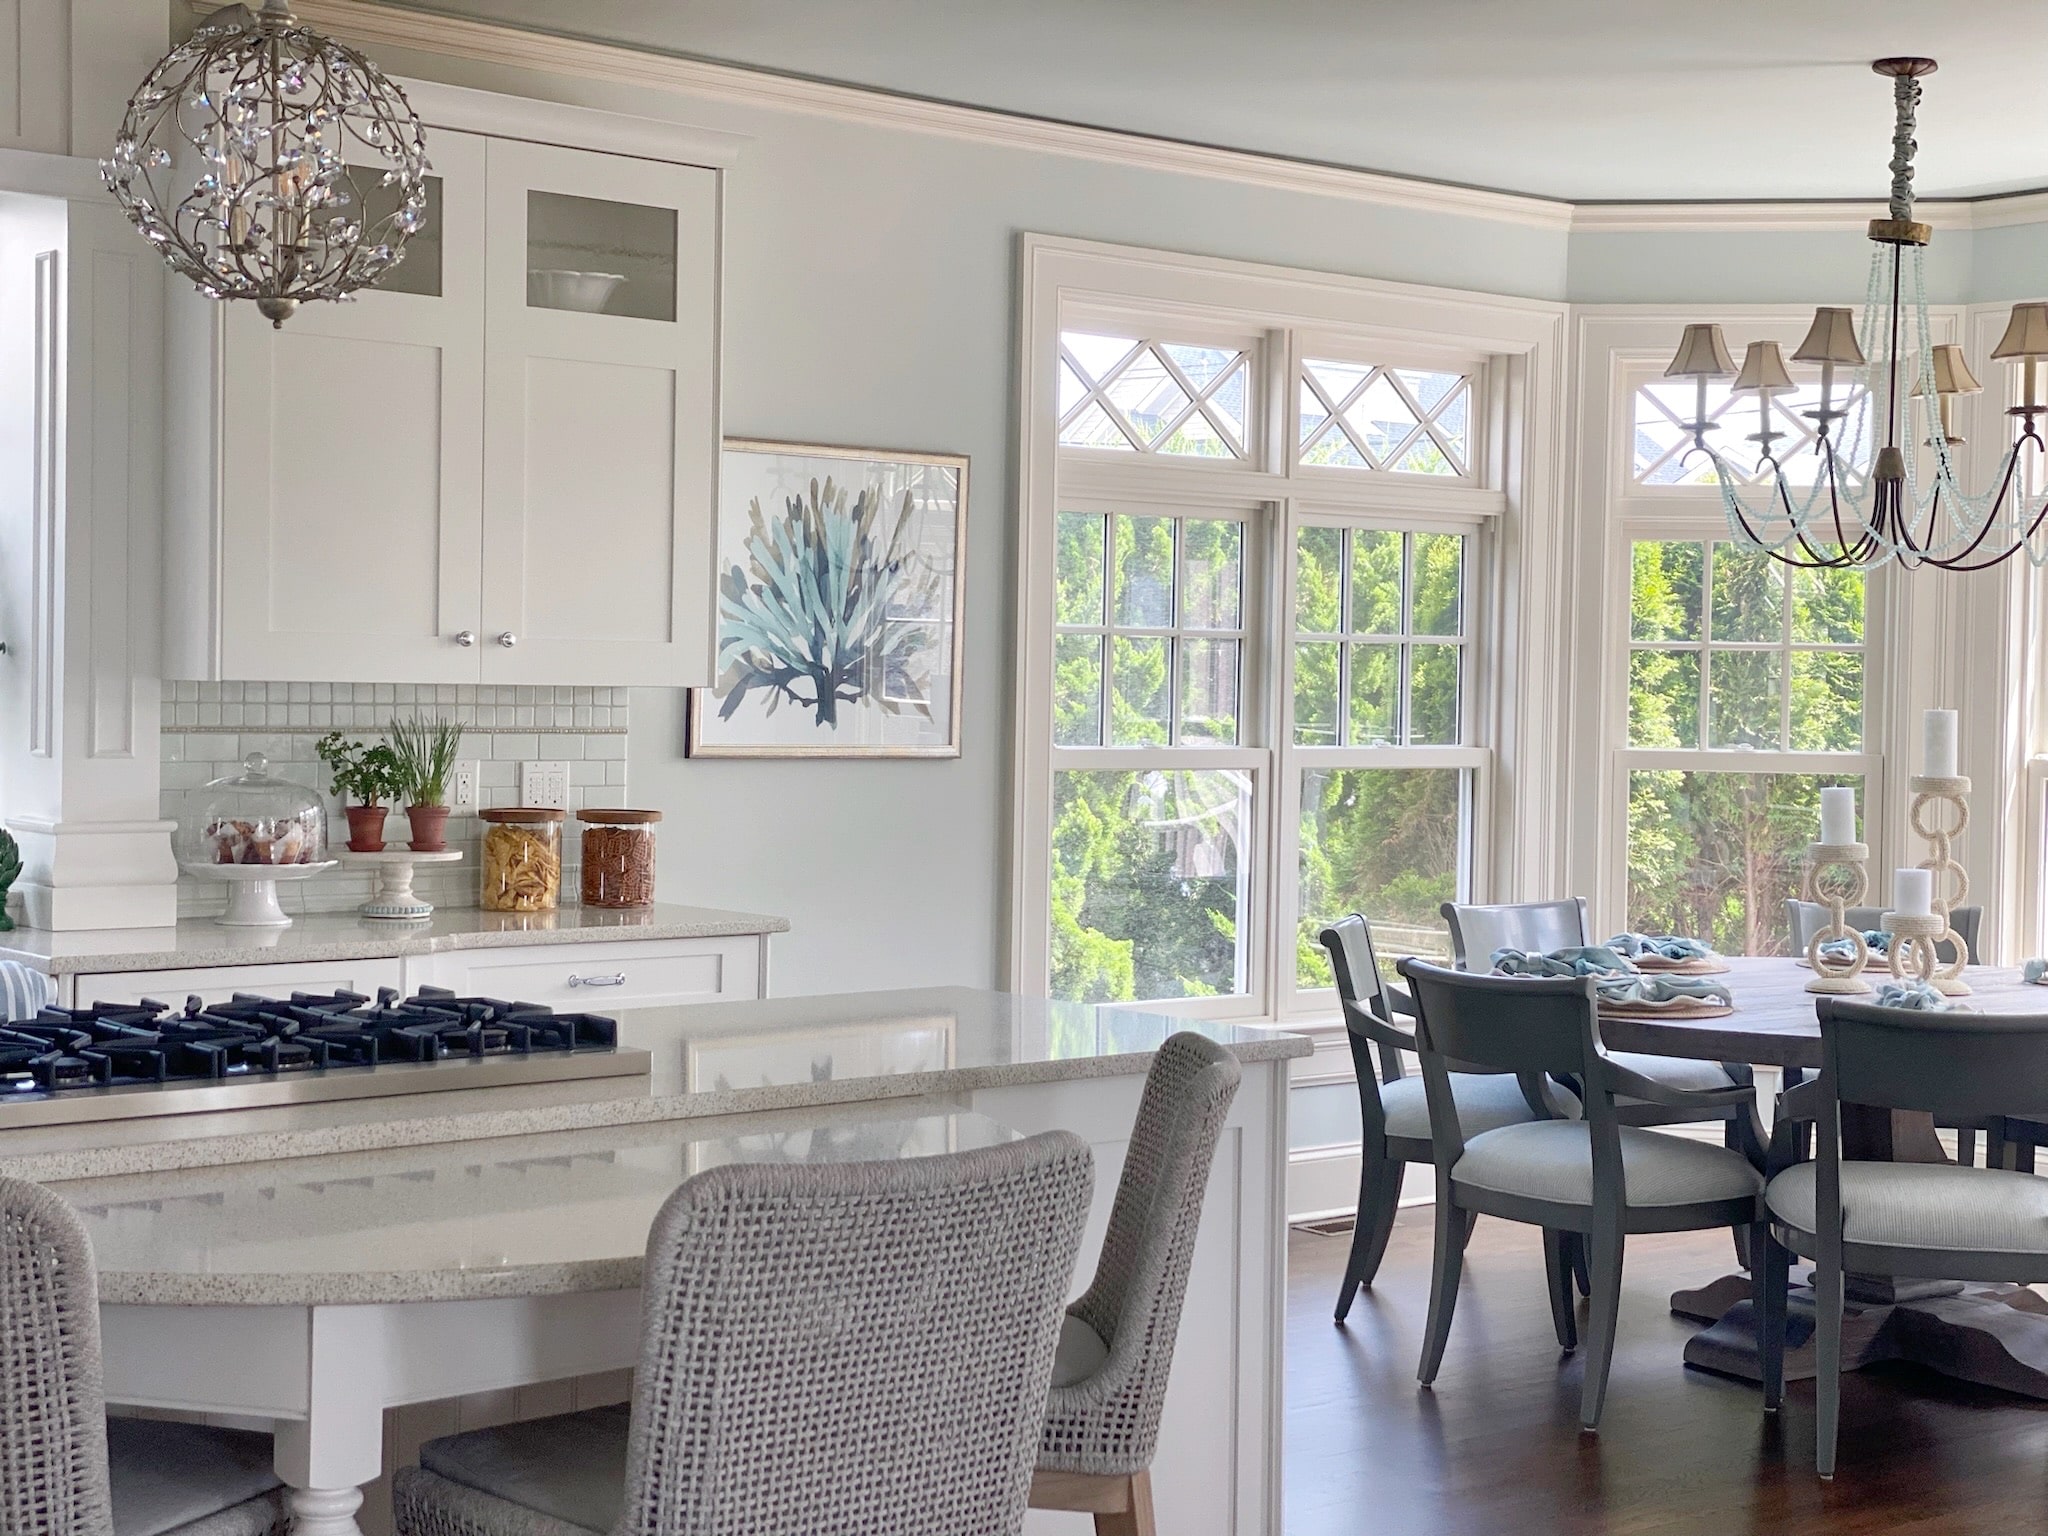 A kitchen with a chic design featuring a table and chairs, accented by an elegant chandelier.